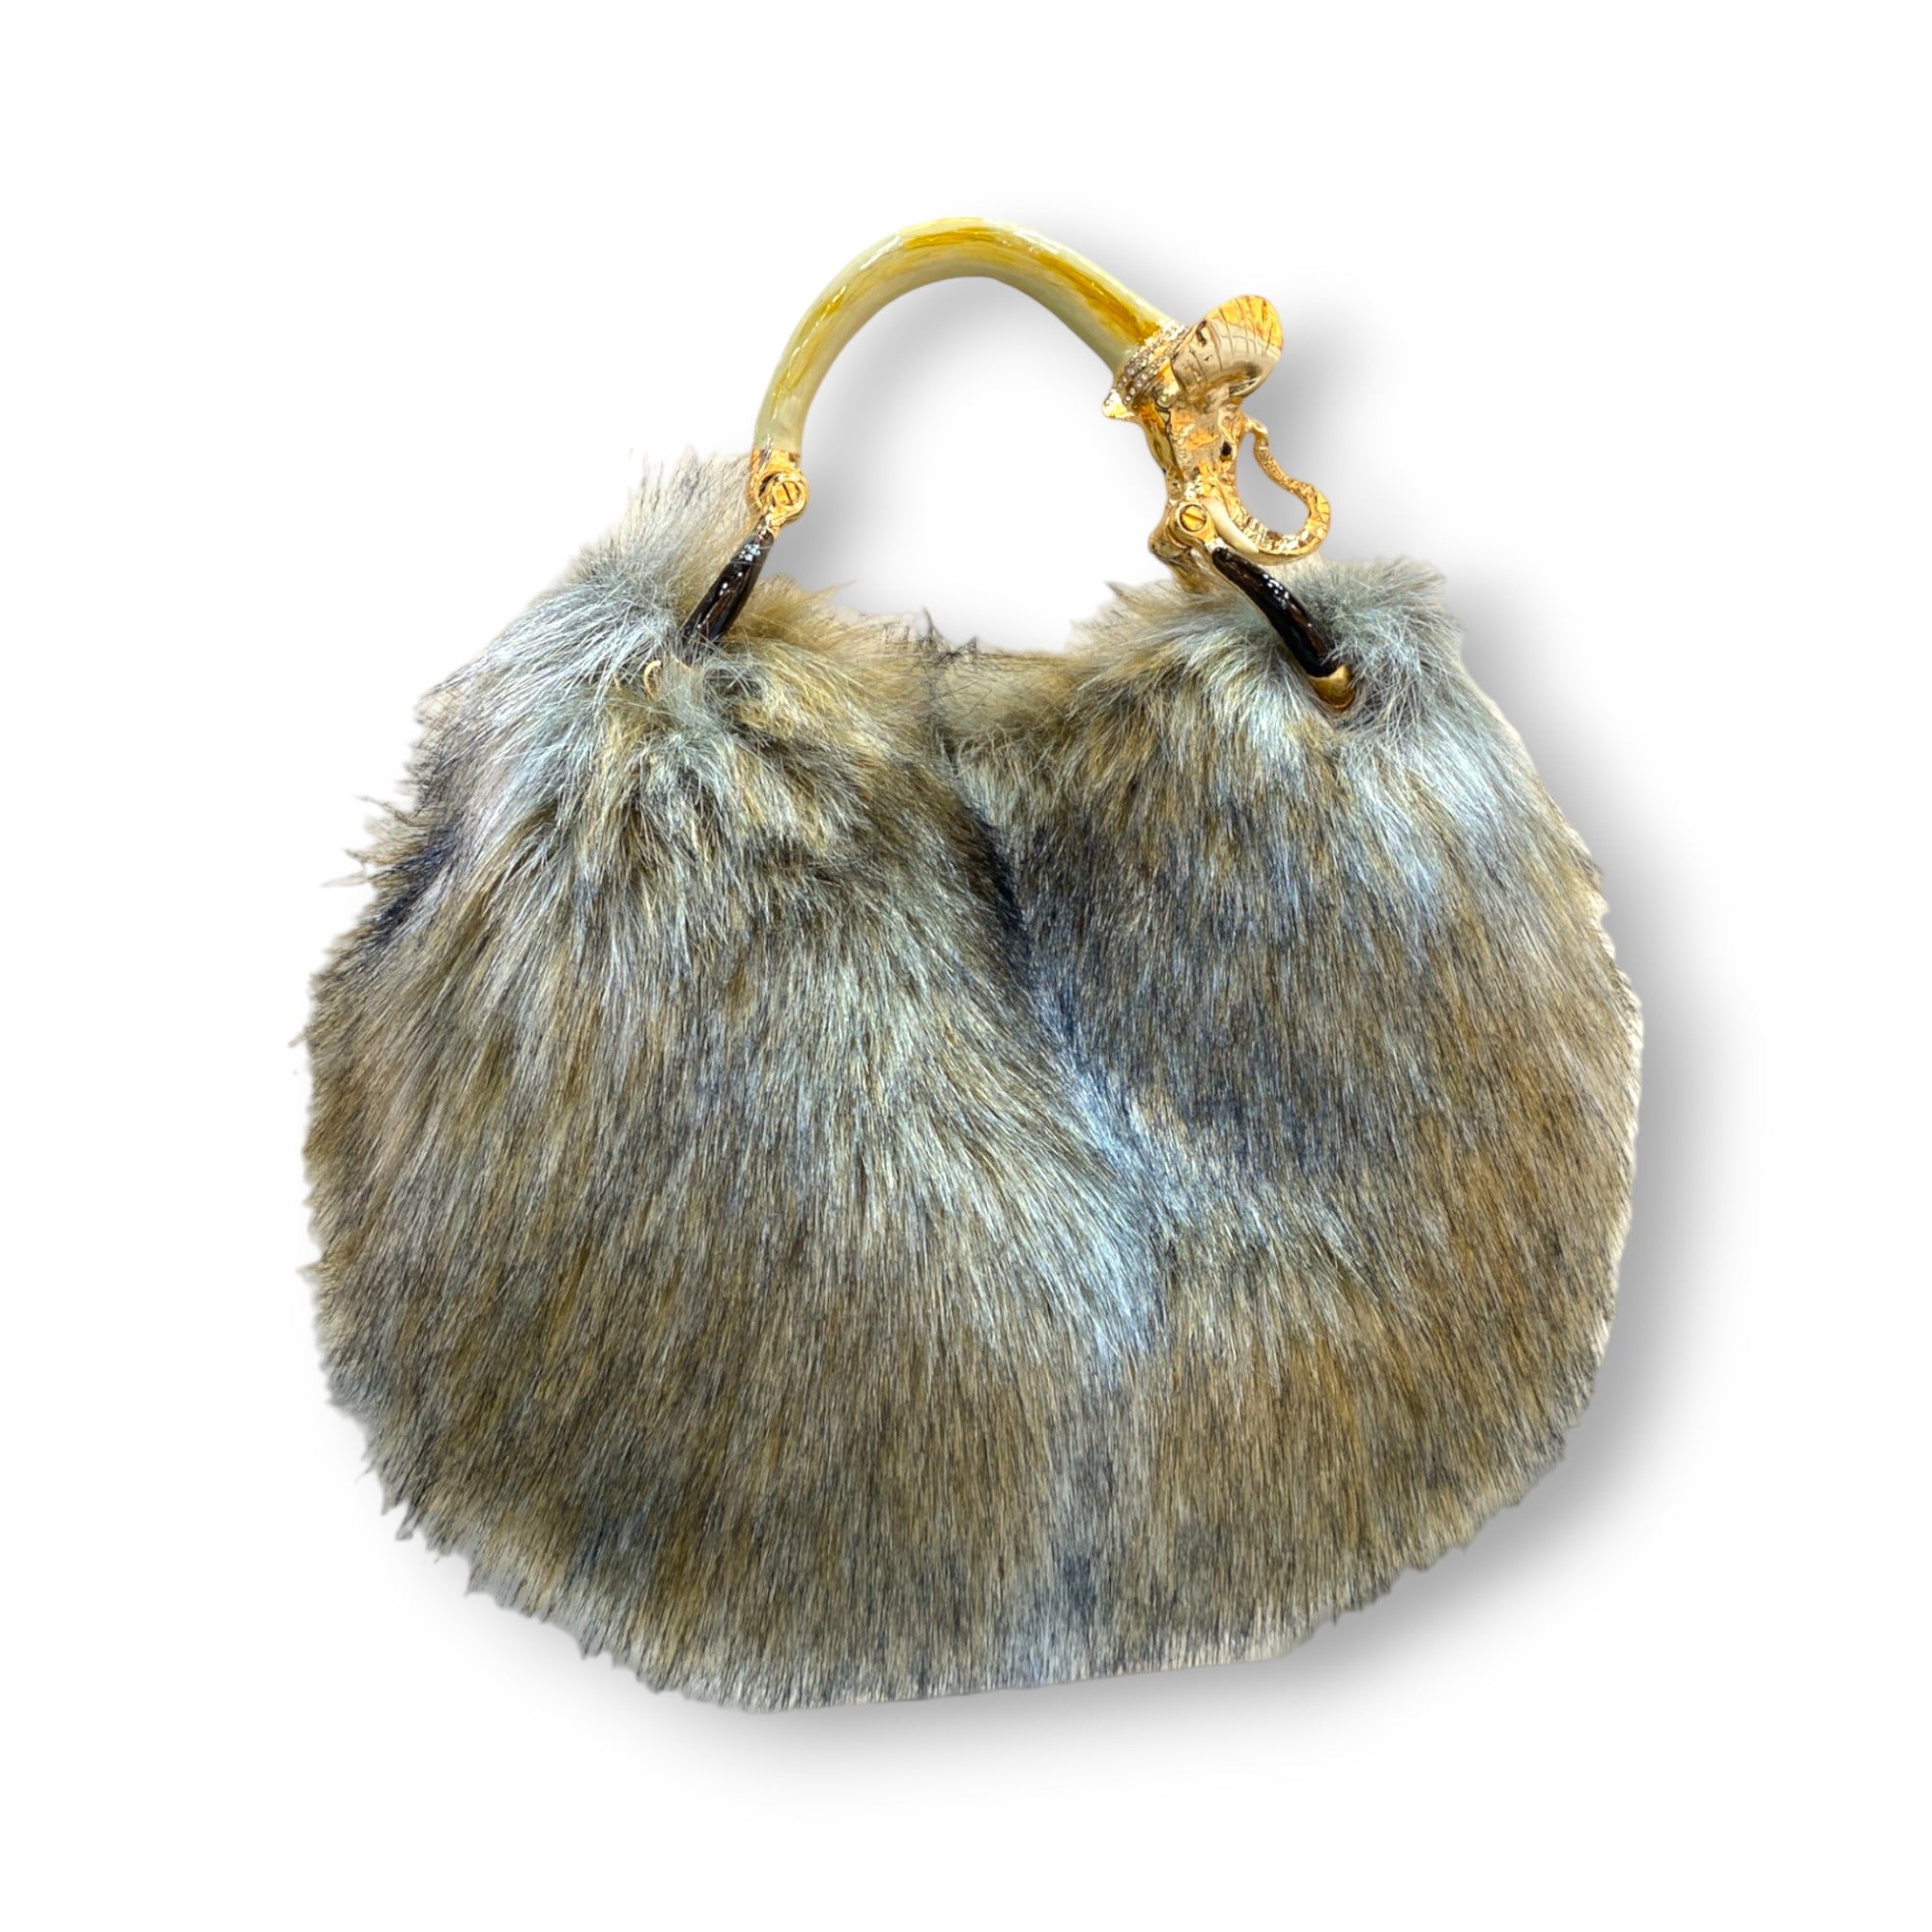 SMALL BAG IN FAUX FUR WHIT ELEPHANT HANDLE